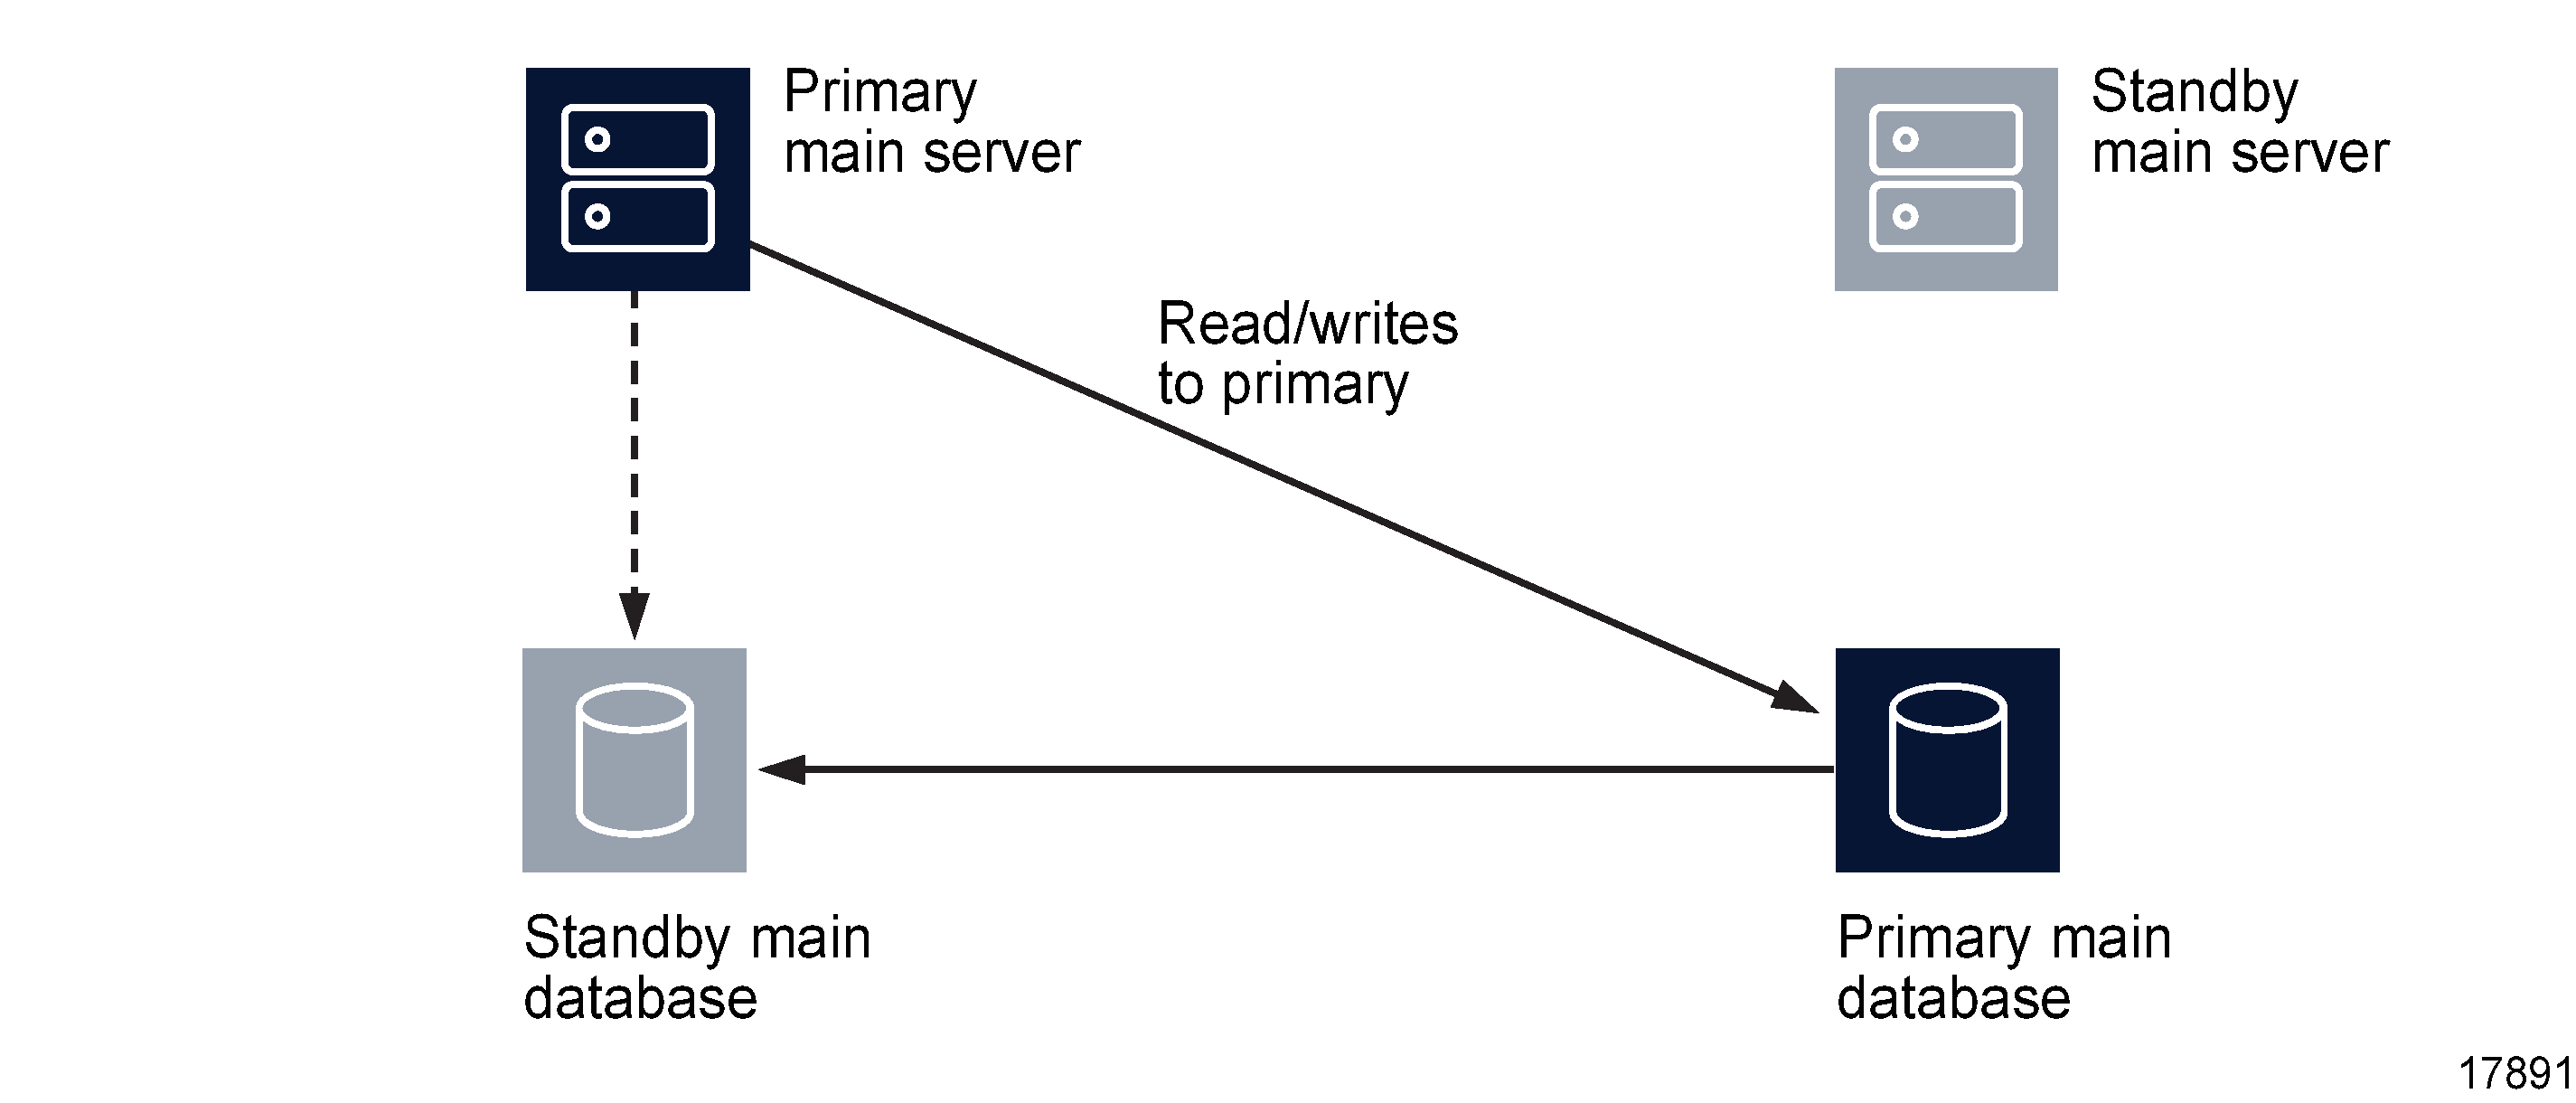 Server and database roles after database switchover